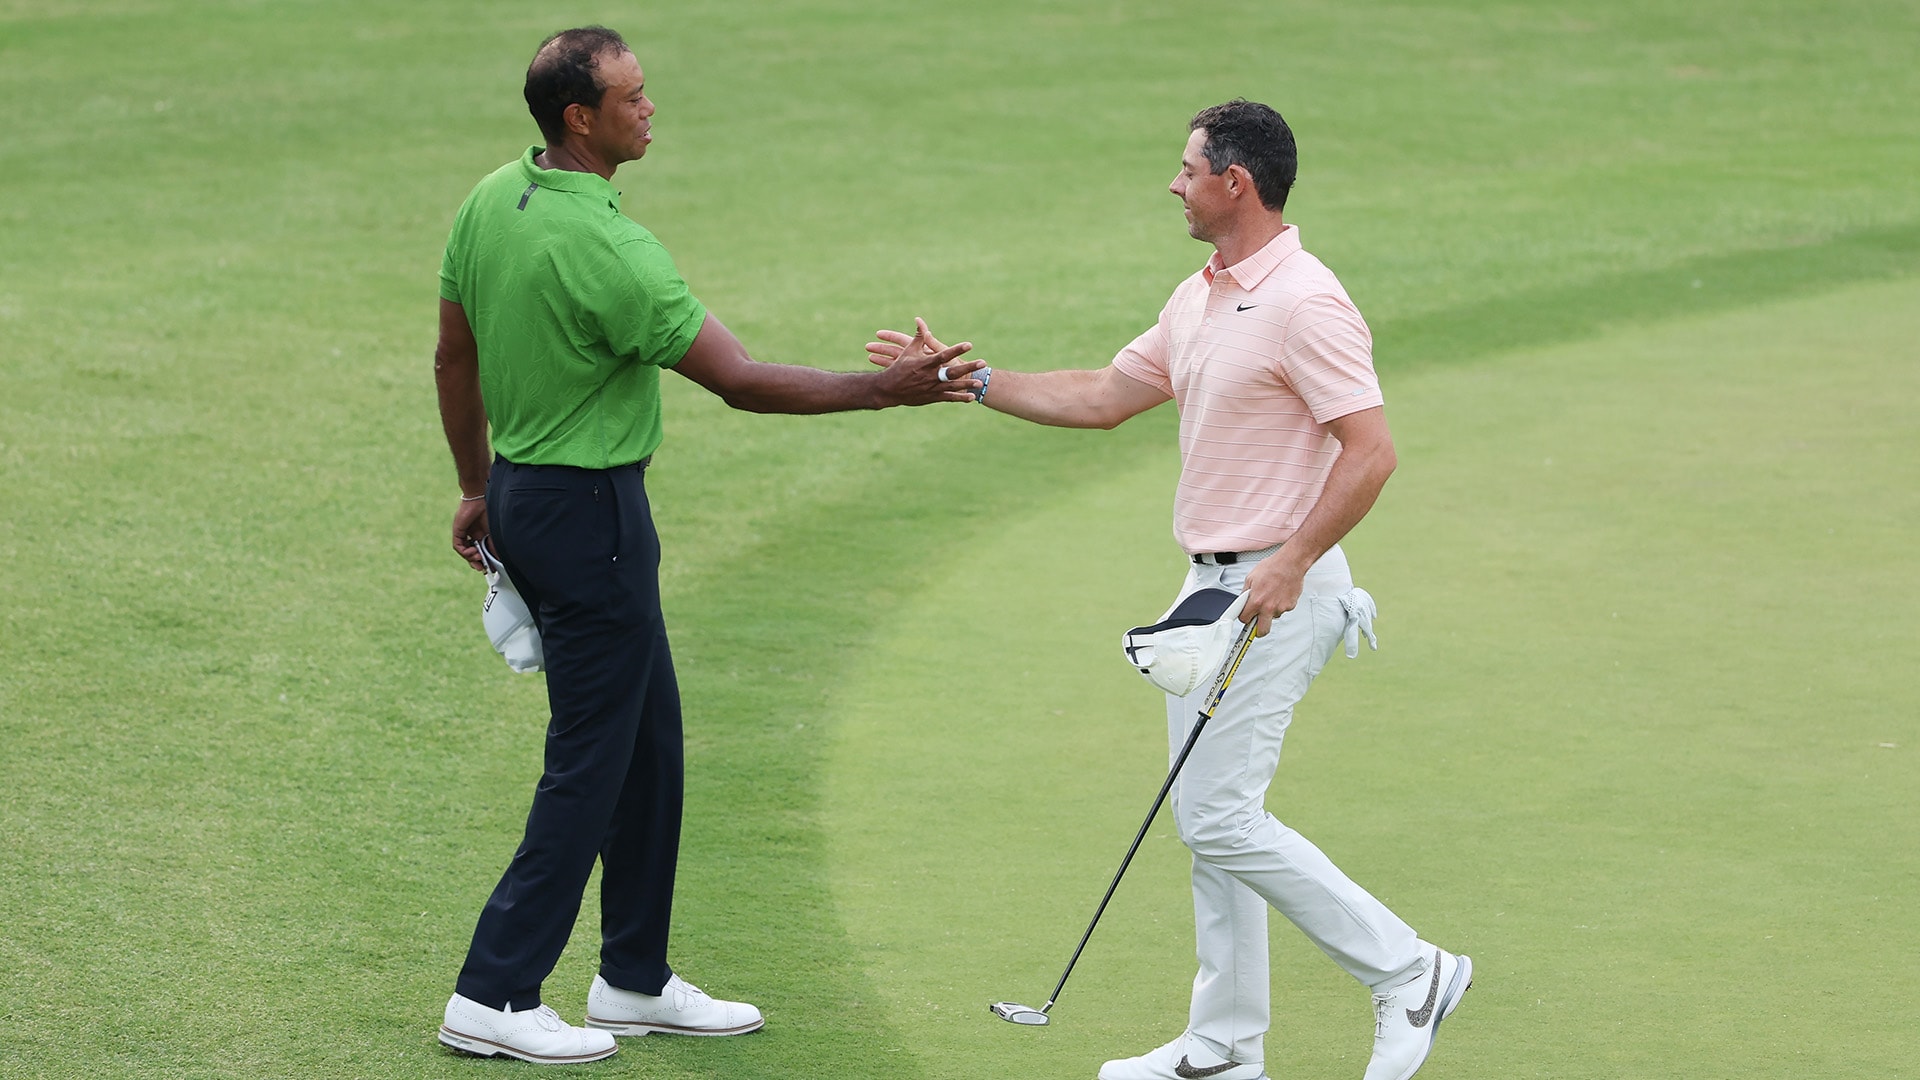 Tiger Woods, Rory McIlroy to face Justin Thomas, Jordan Spieth in ‘The Match’